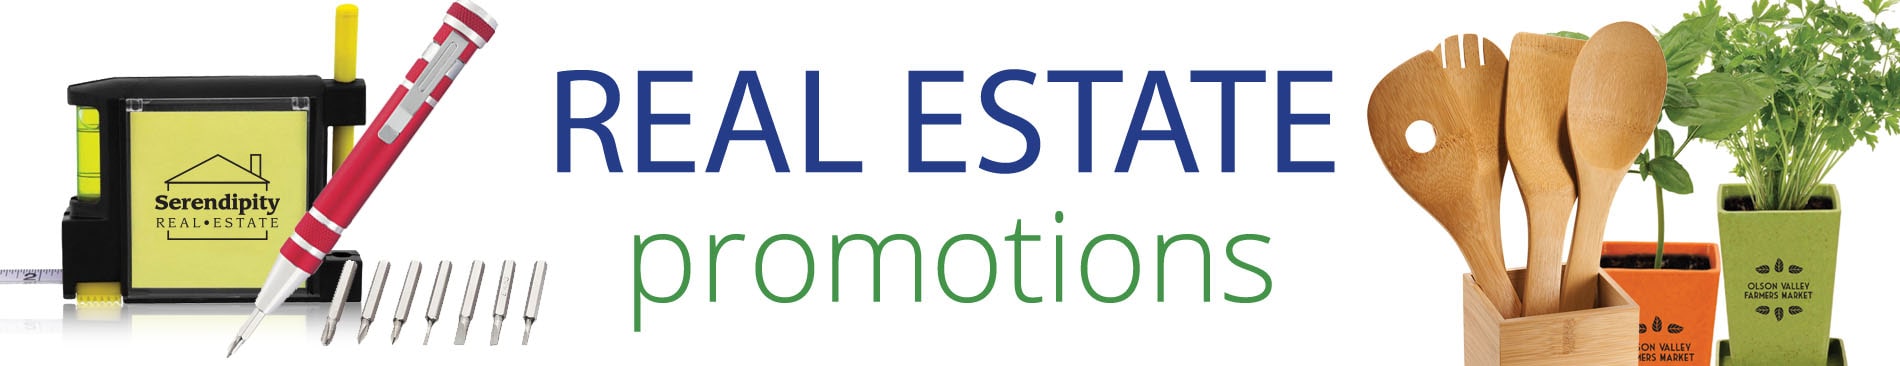 Real Estate Promotional Items